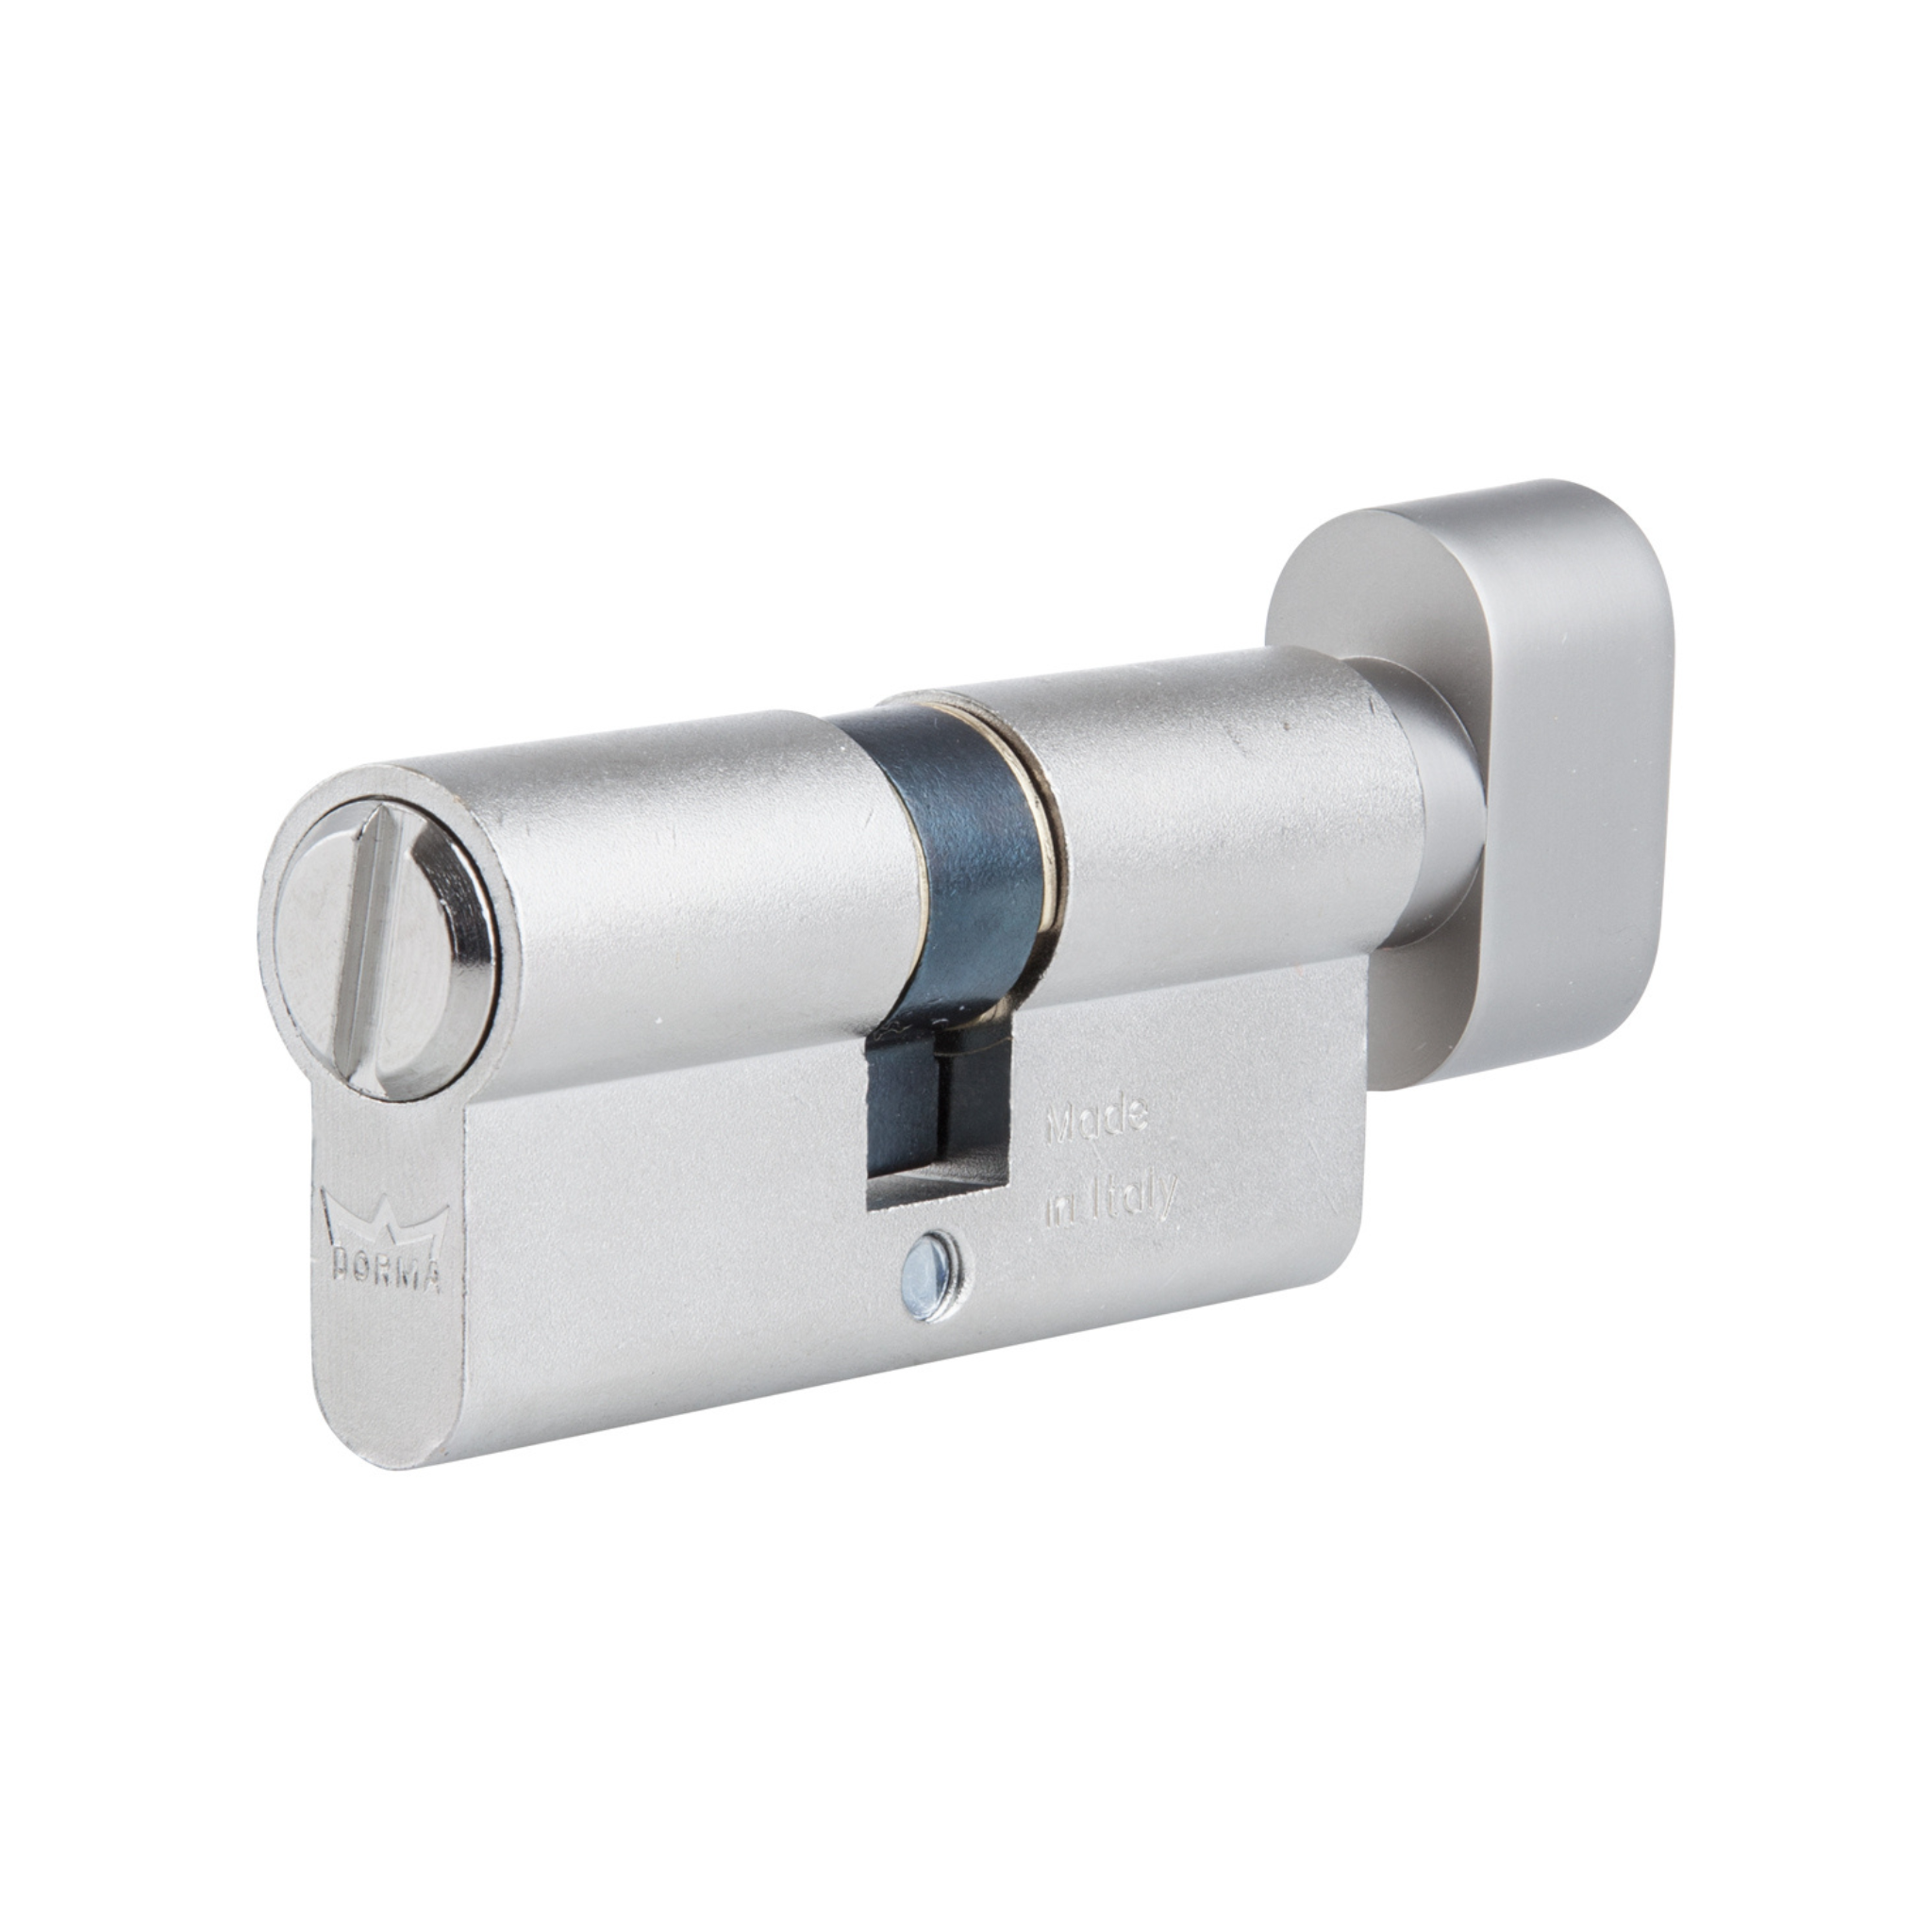 DBC006501, 65mm - 32.5/32.5, Double Cylinder (Bathroom/Privacy/Emergency), Thumbturn to Coin, Satin Nickel, DORMAKABA